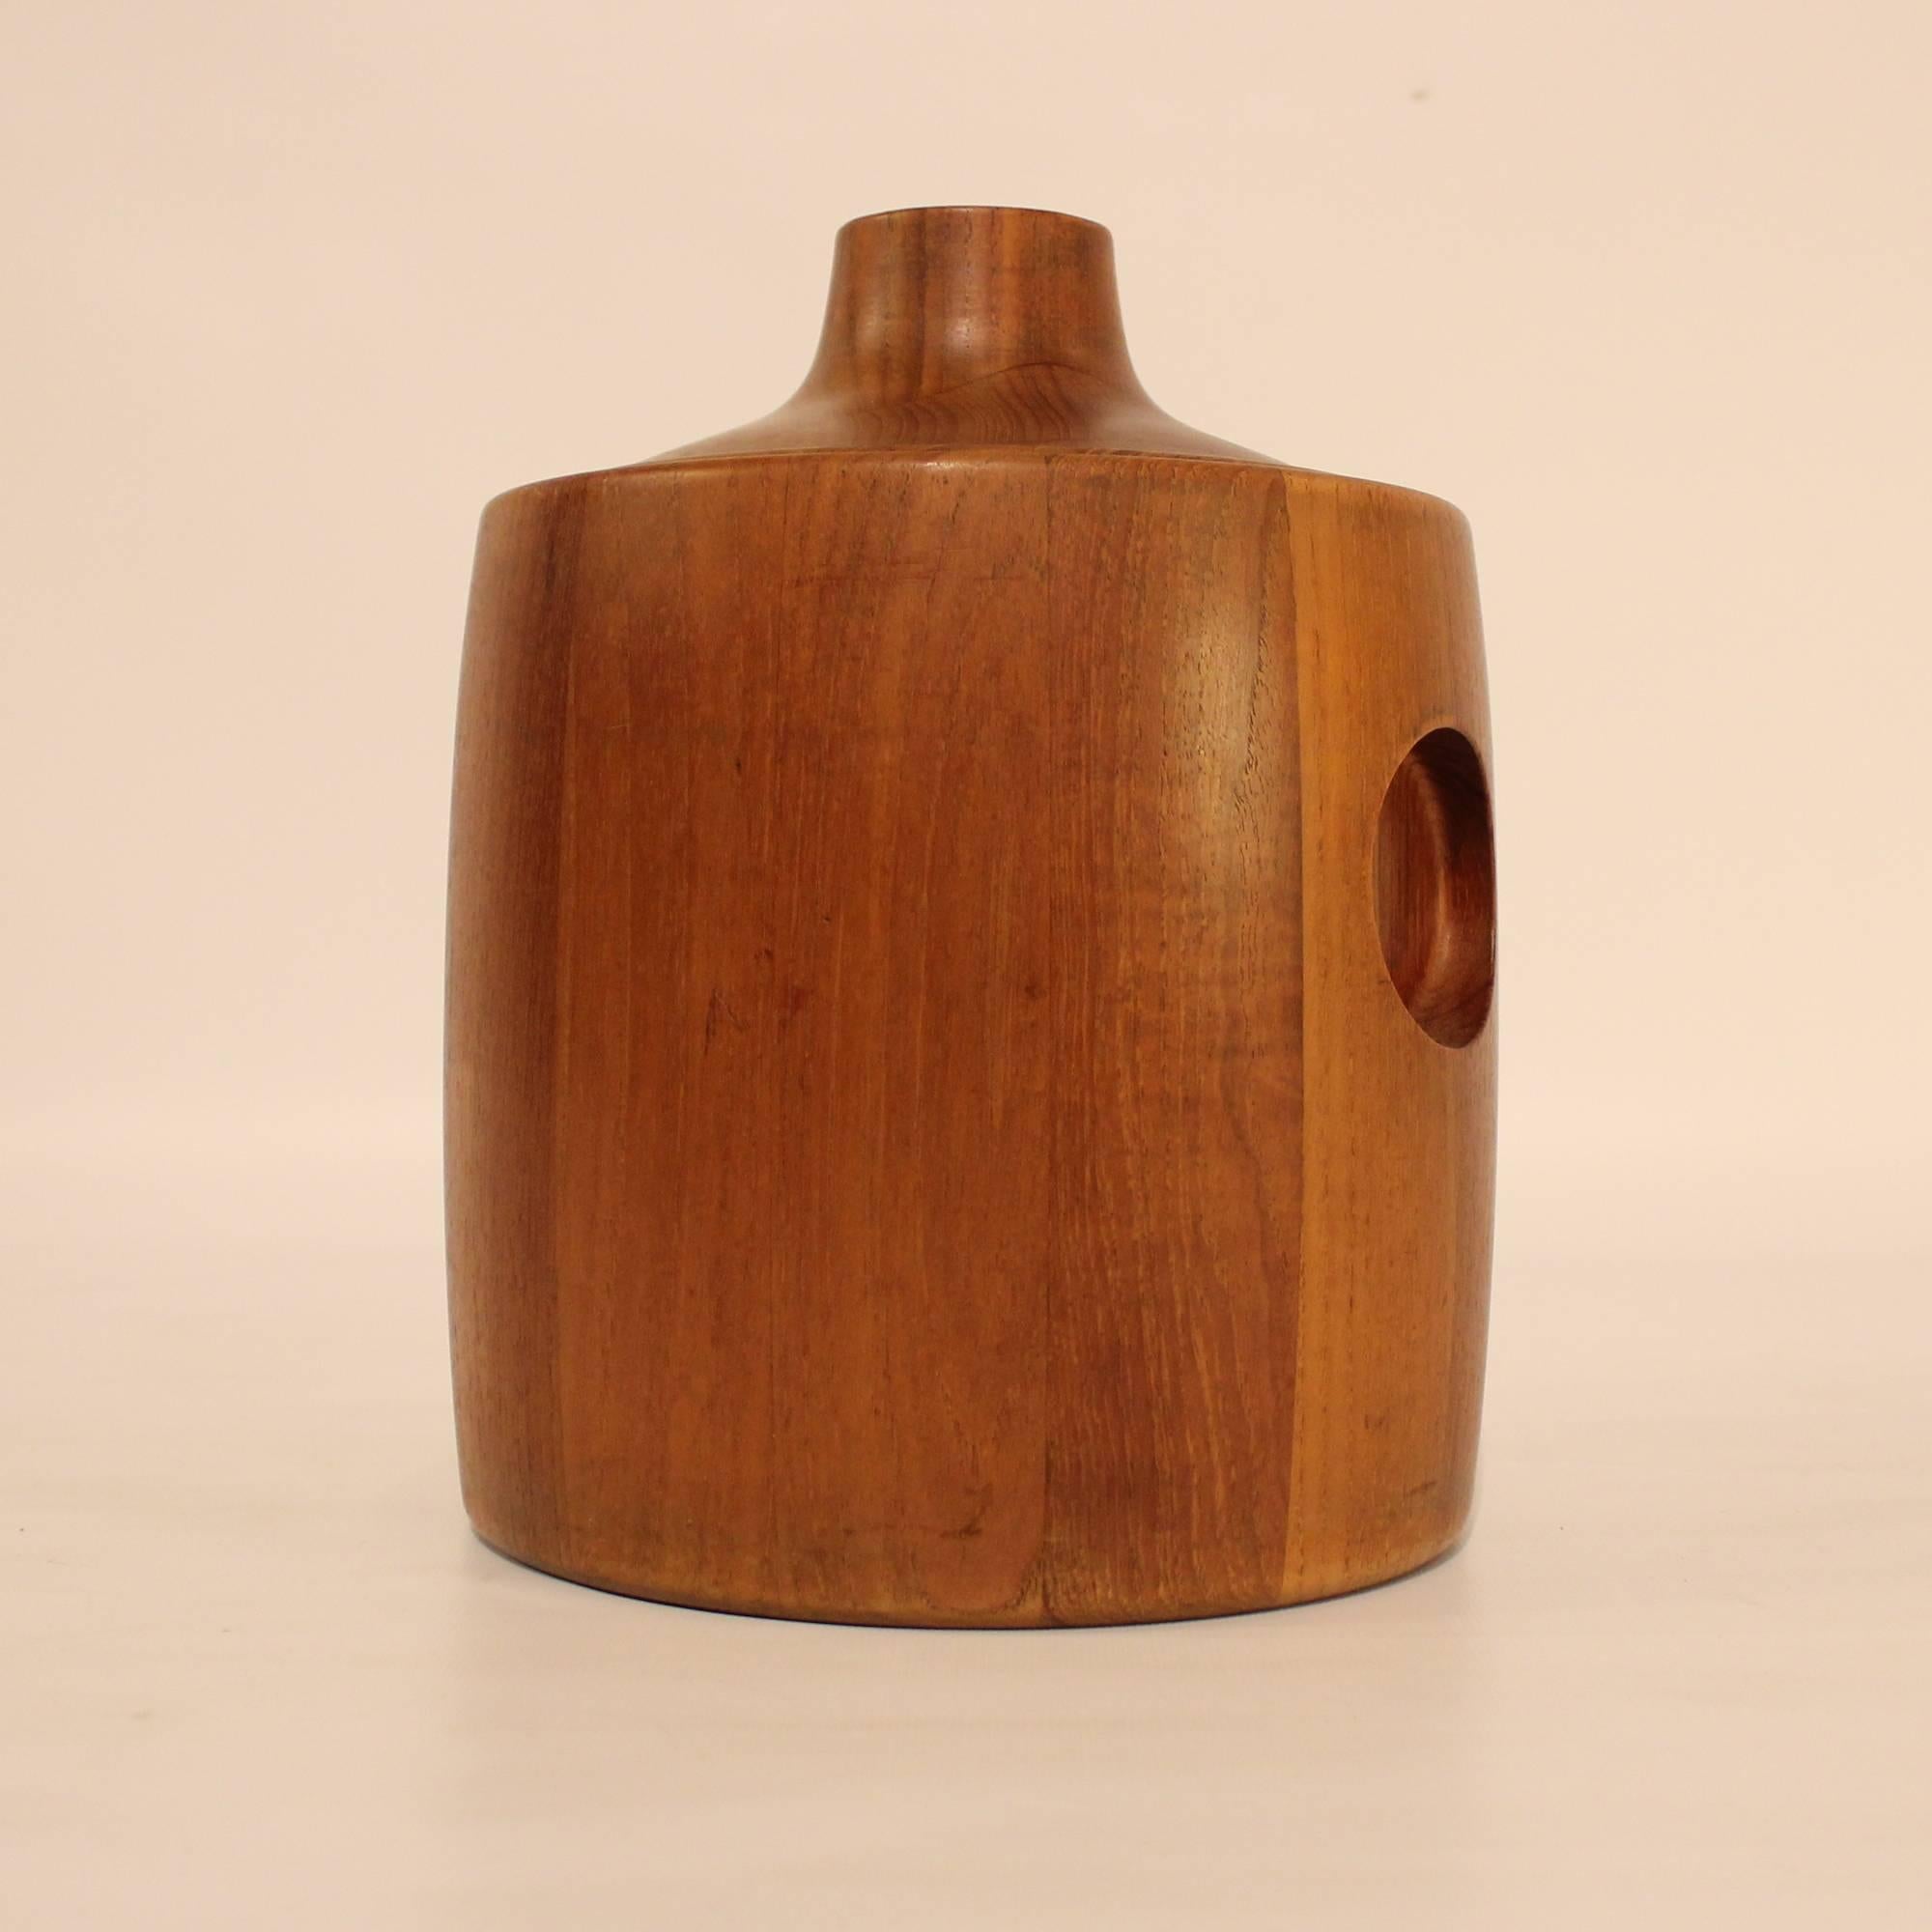 1960s Danish Modern teak ice bucket with black plastic insulating liner. Designed by Henning Koppel for Georg Jensen in the 1960s, and marked with Koppel's signature and the Georg Jensen company mark.